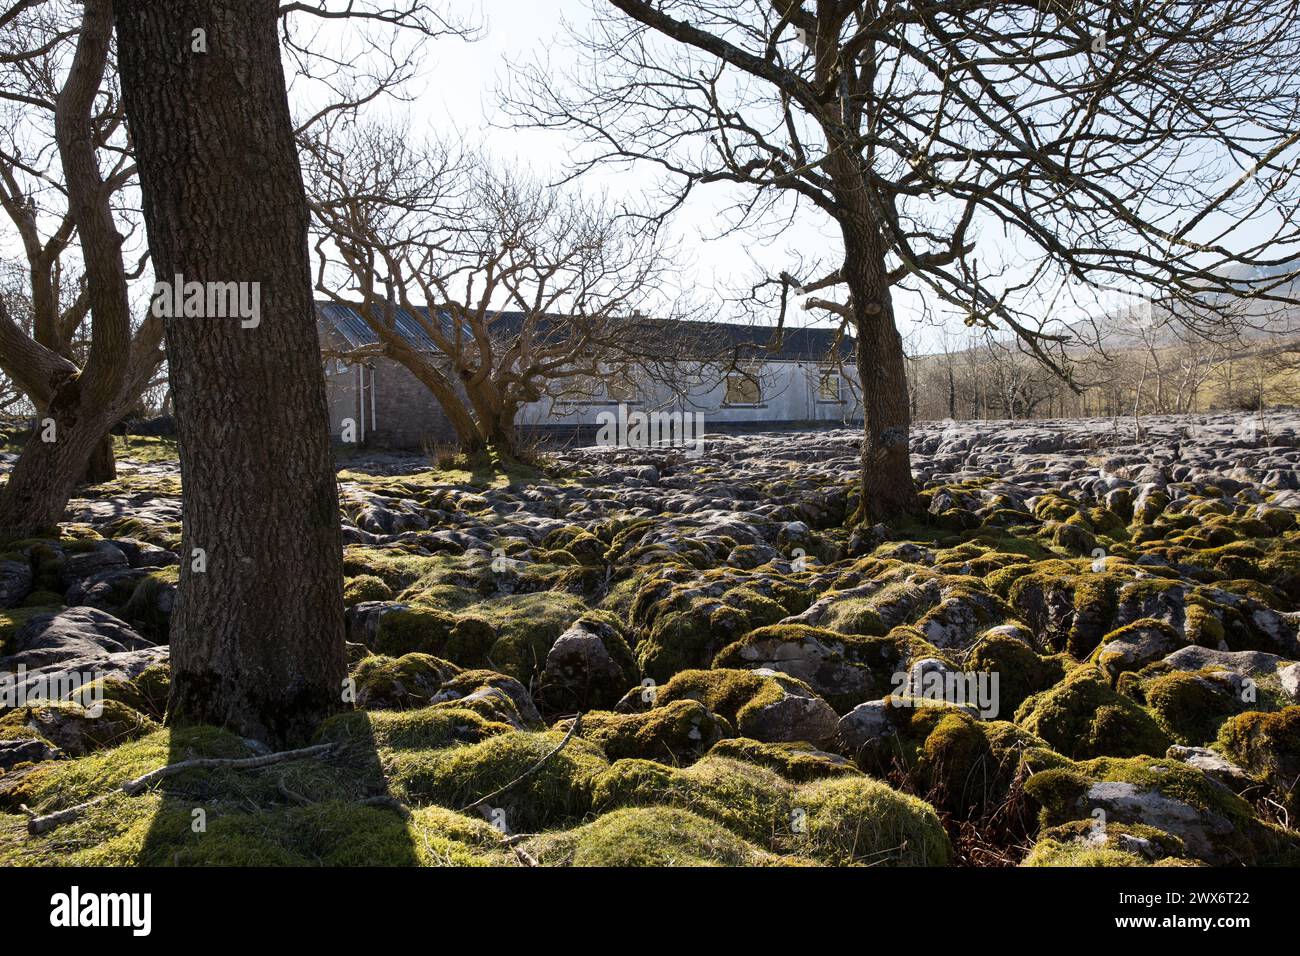 Trees in front of a remote building / outdoor centre sat on a mossy limestone pavement in the North Yorkshire countryside, UK on a sunny day Stock Photo